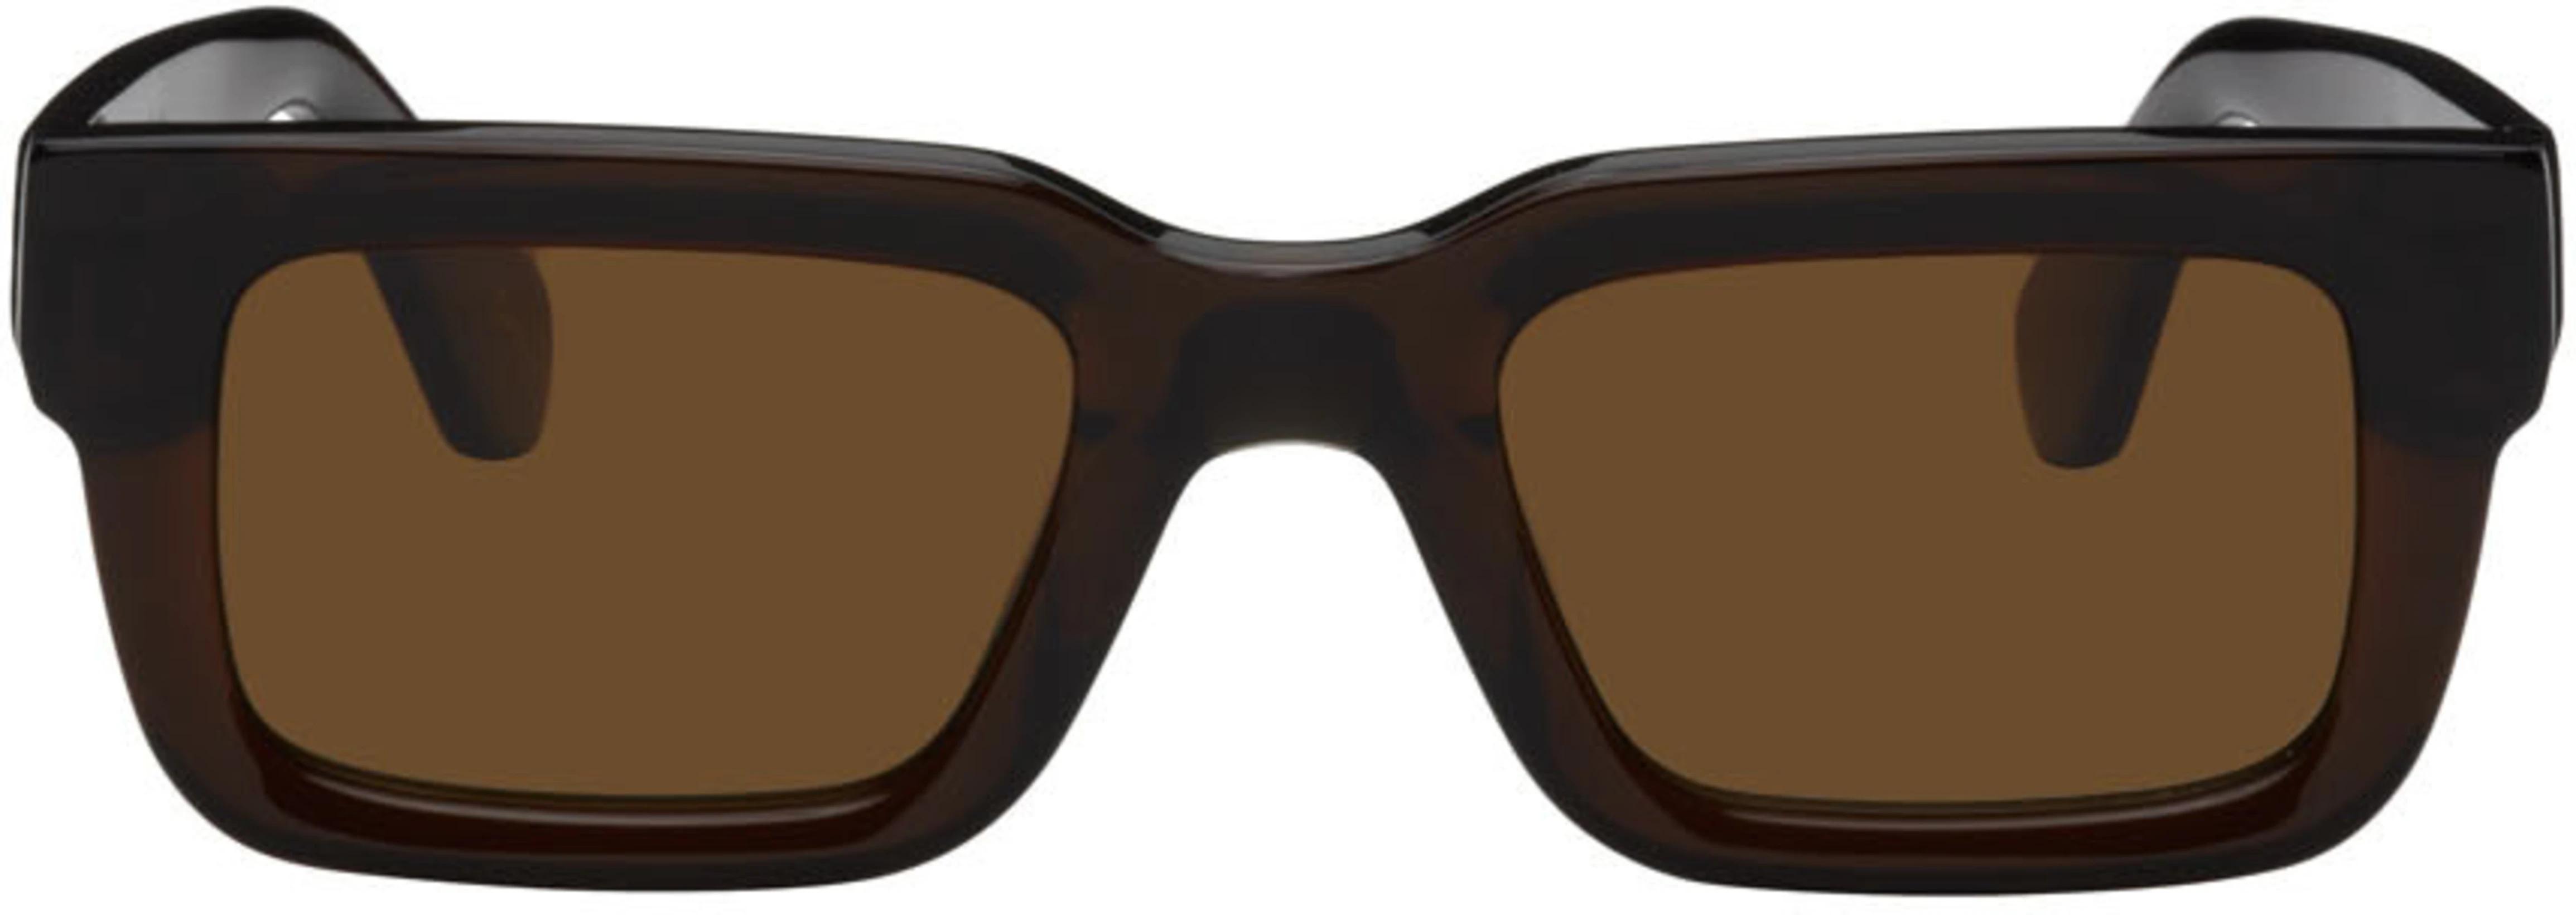 Brown 05 Sunglasses by CHIMI